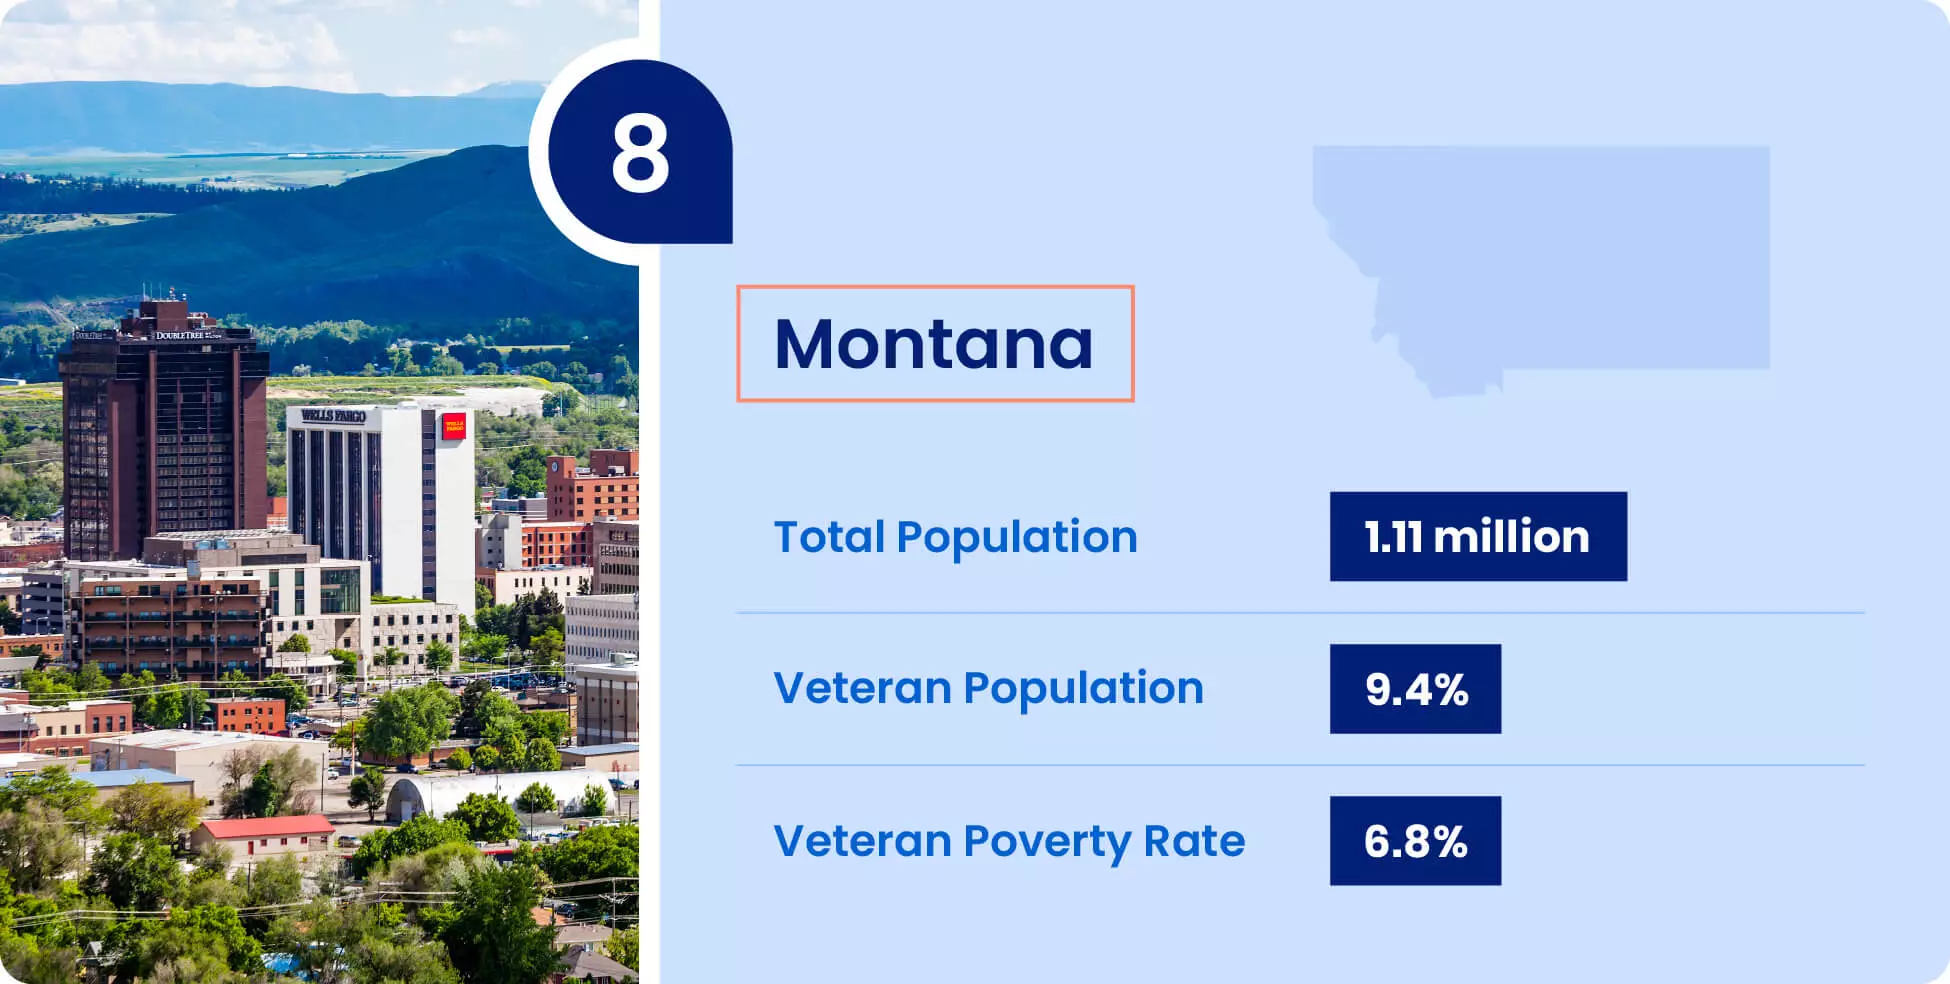 Image shows key information for military retirees thinking of moving to Montana.